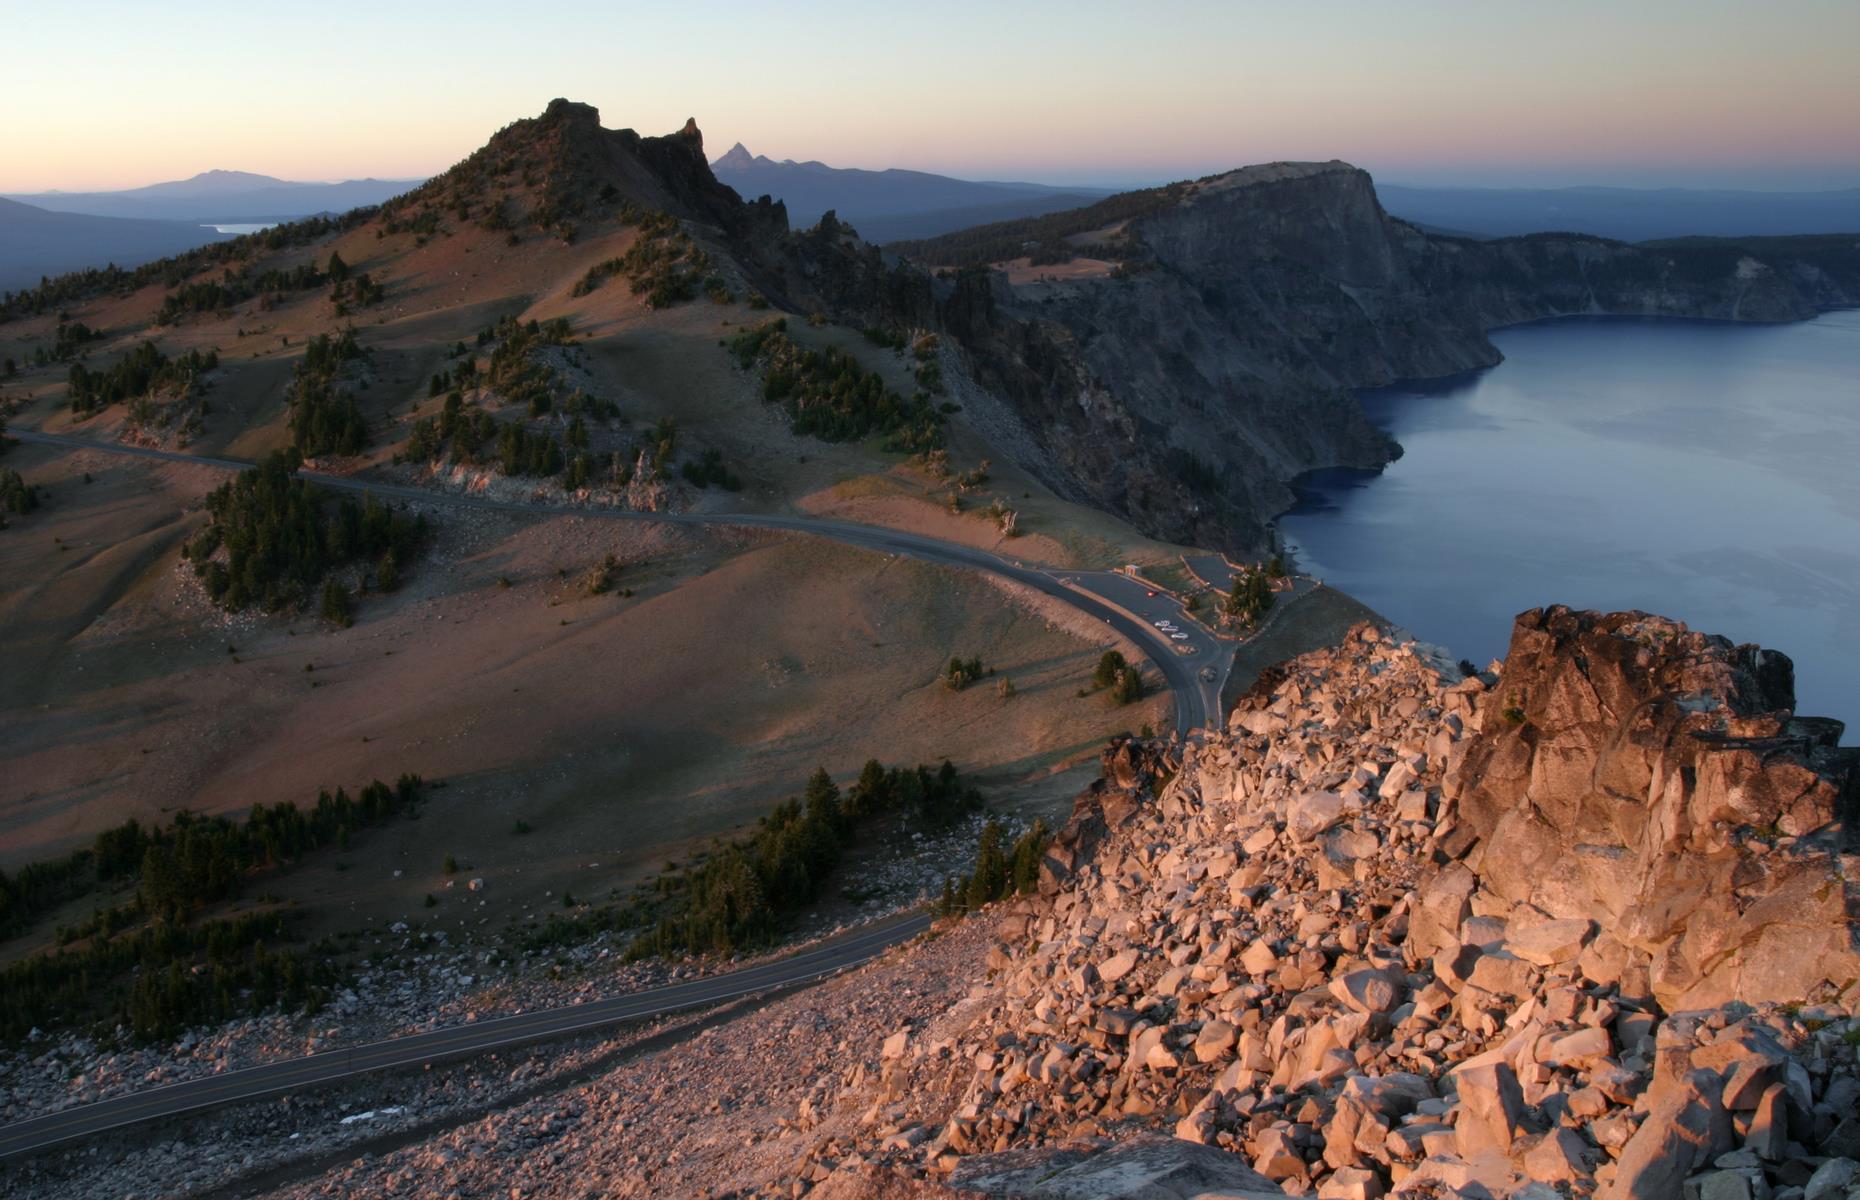 <p>Crater Lake is the deepest lake in the US and also <a href="https://www.loveexploring.com/gallerylist/87438/americas-most-stunning-lakes">one of the most breathtakingly gorgeous</a>. And this 33-mile (53km) highway allows you to gaze upon its beauty from every angle. It loops around the caldera rim of the sapphire lake, with several <a href="https://www.nps.gov/crla/planyourvisit/overlooks.htm">overlooks and pullouts</a> for perfect views of forested islands, flower-strewn slopes and craggy rock formations.</p>